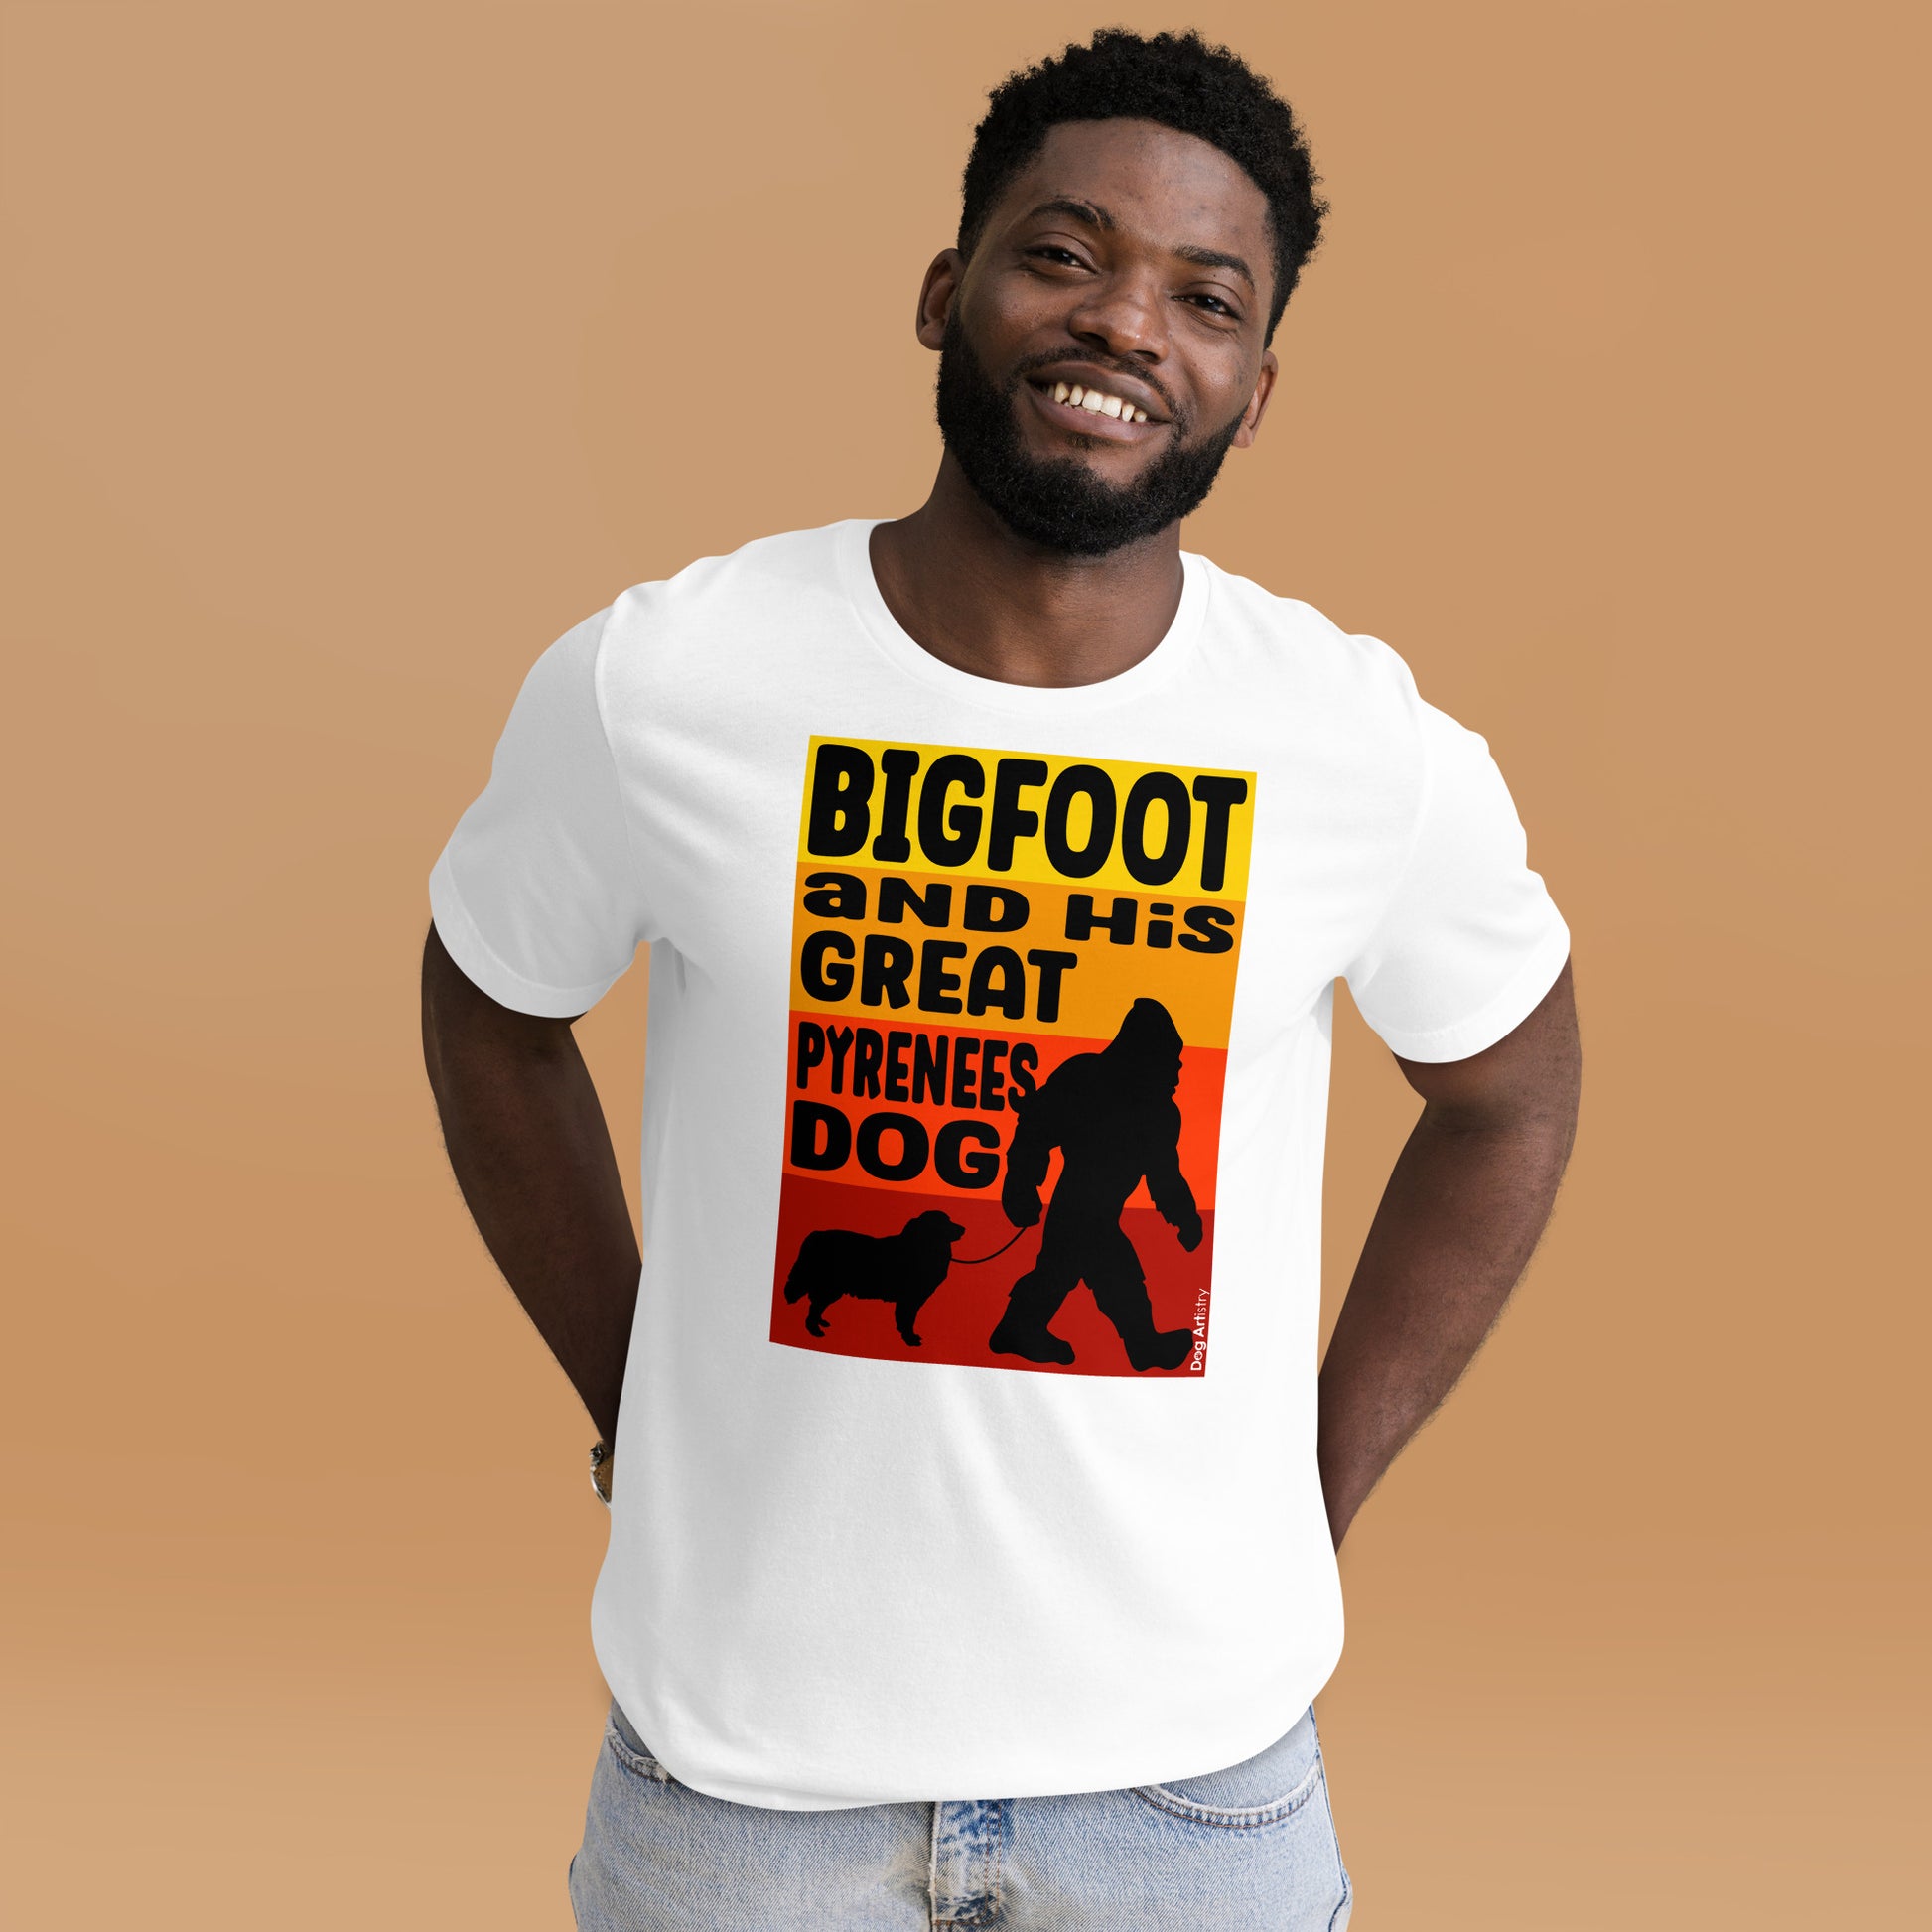 Bigfoot and his Great Pyrenees unisex white t-shirt by Dog Artistry.